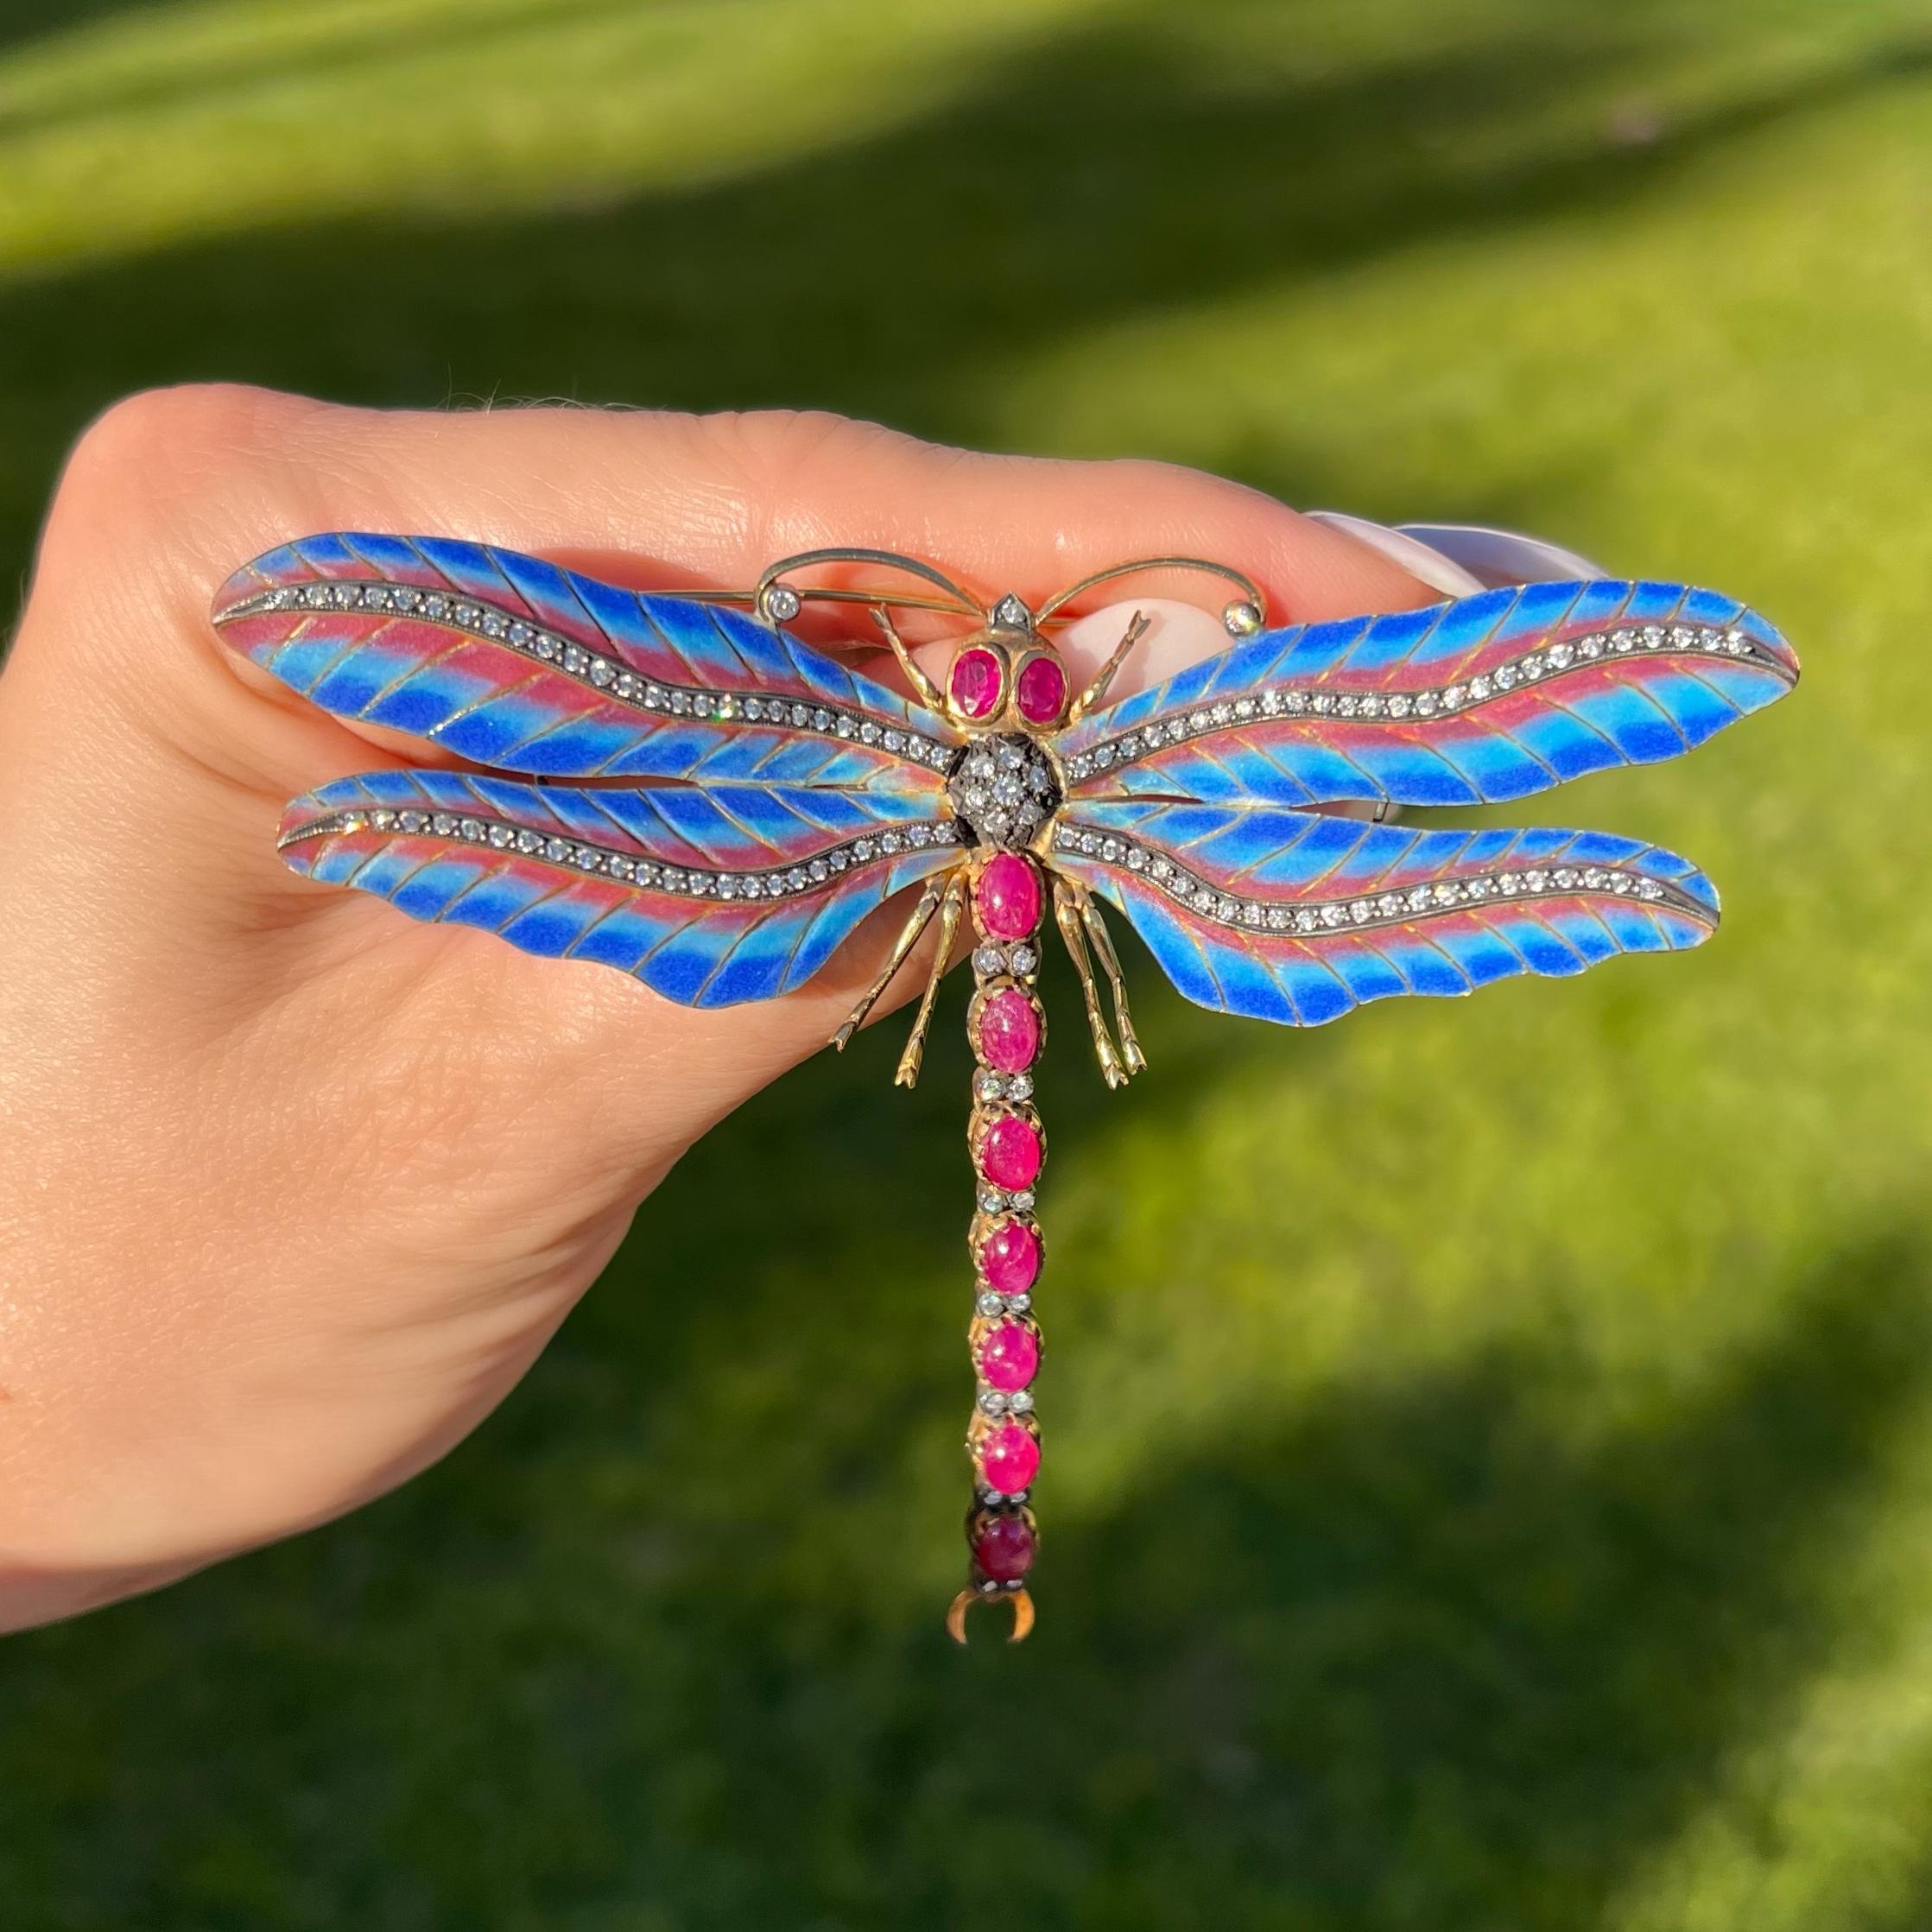 coraline dragonfly